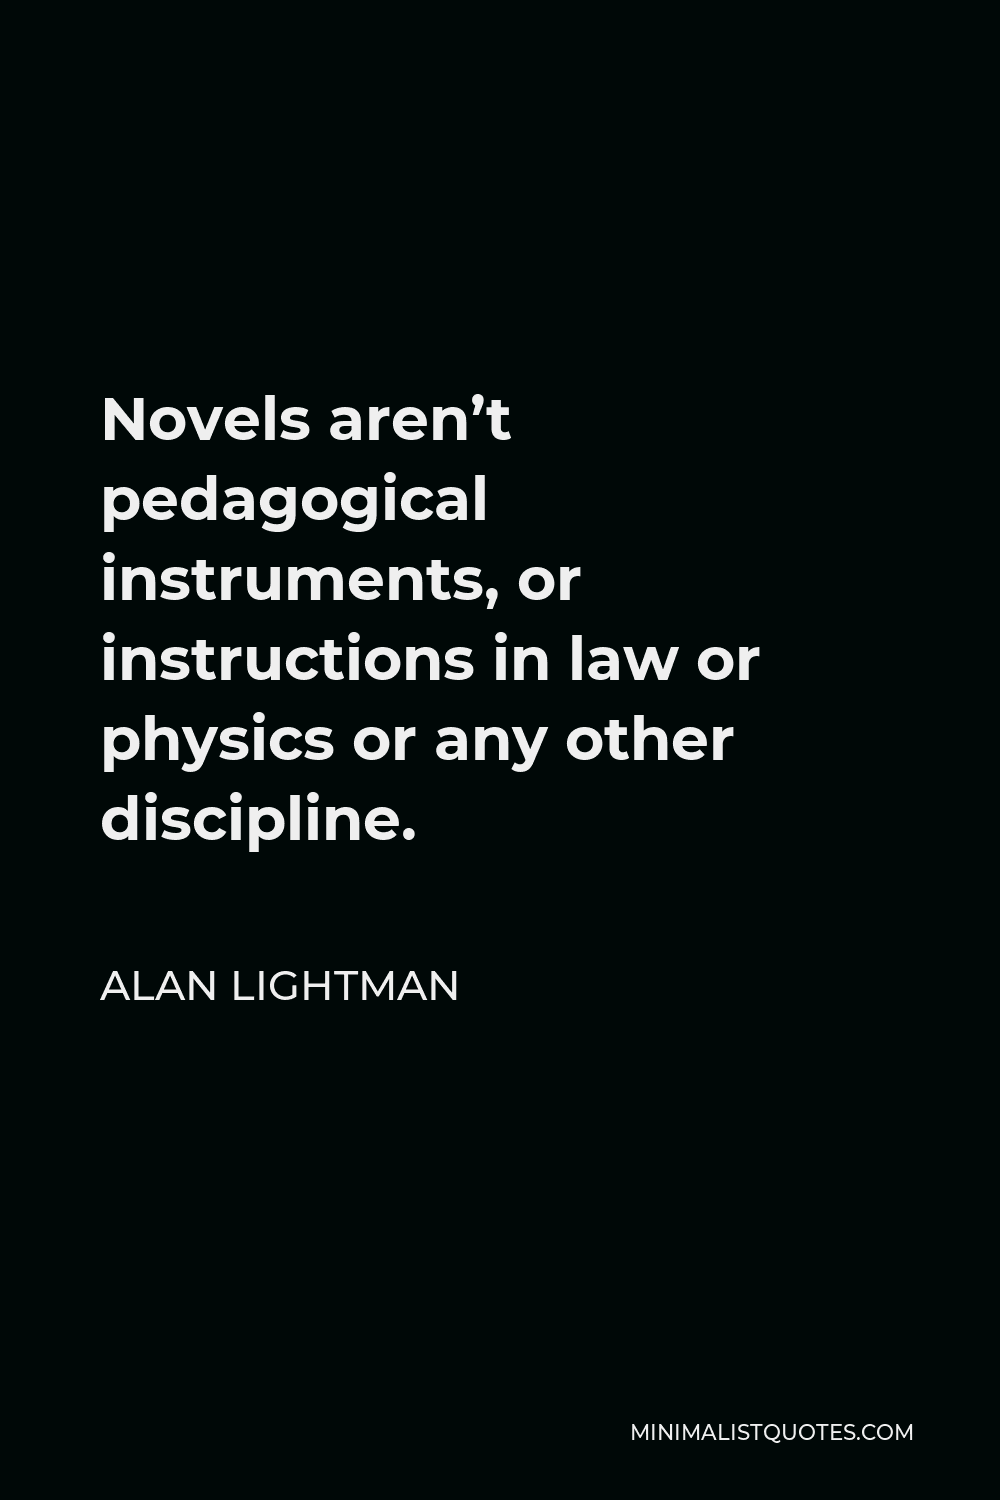 Alan Lightman Quote - Novels aren’t pedagogical instruments, or instructions in law or physics or any other discipline.